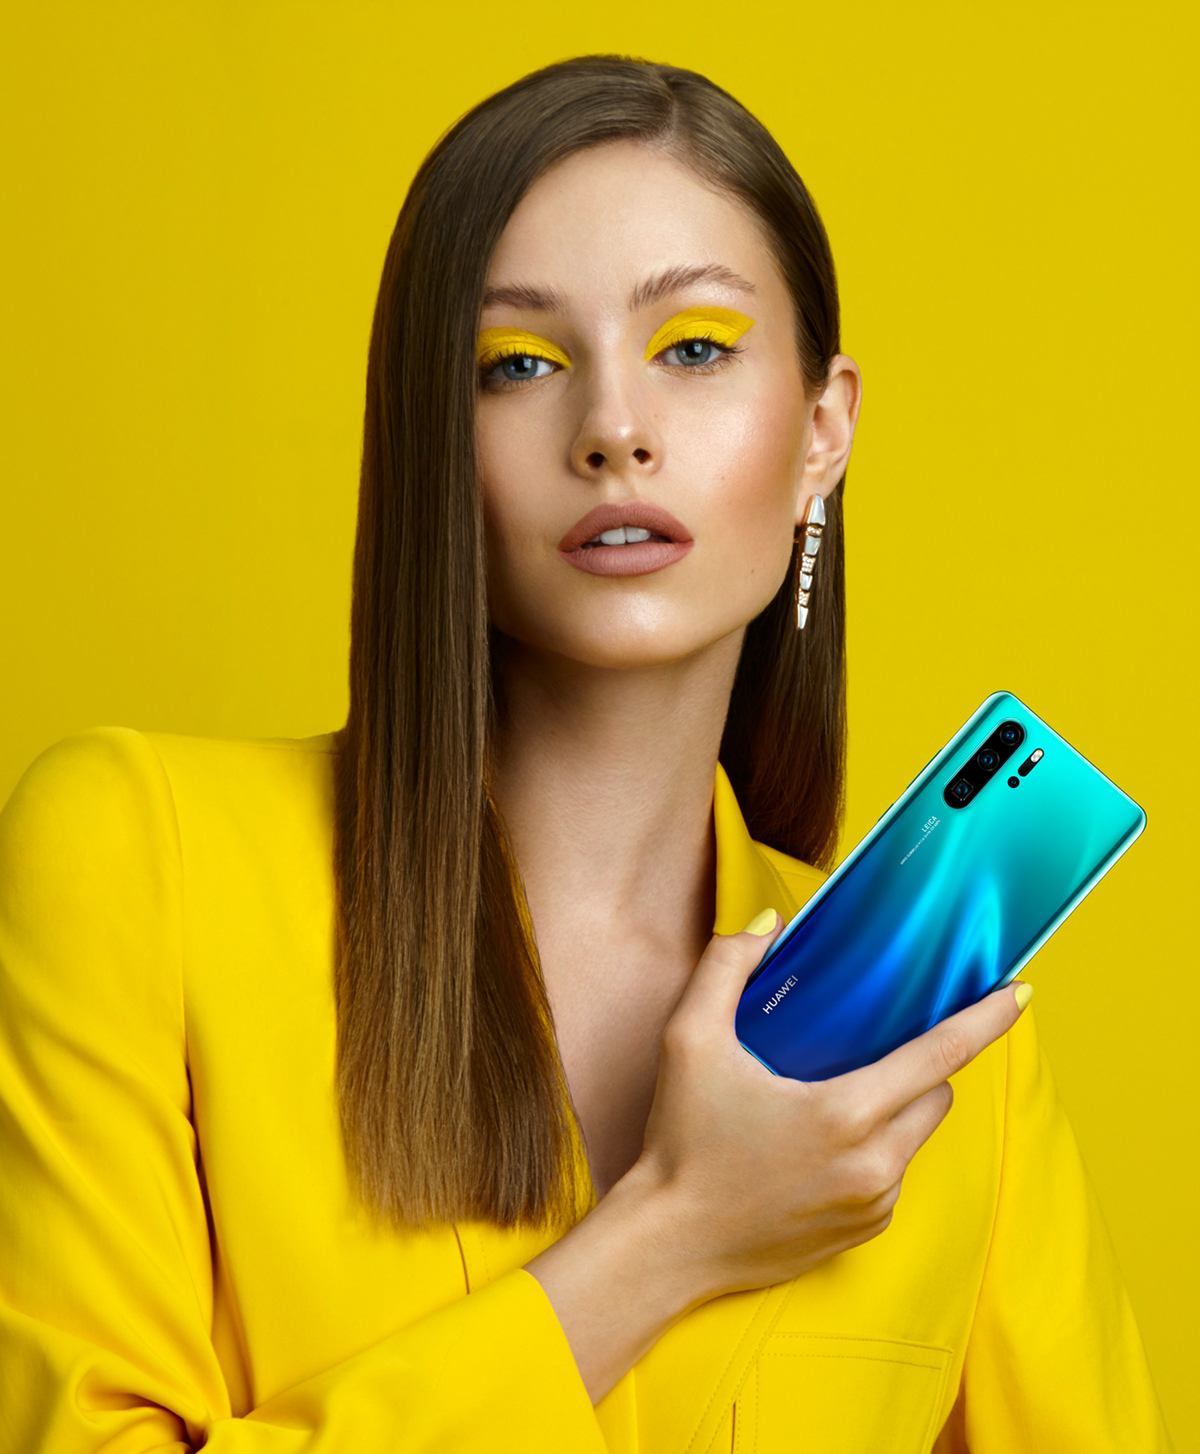 huawei advertisment high end retouch beauty retouch color skin phone editorial Leica